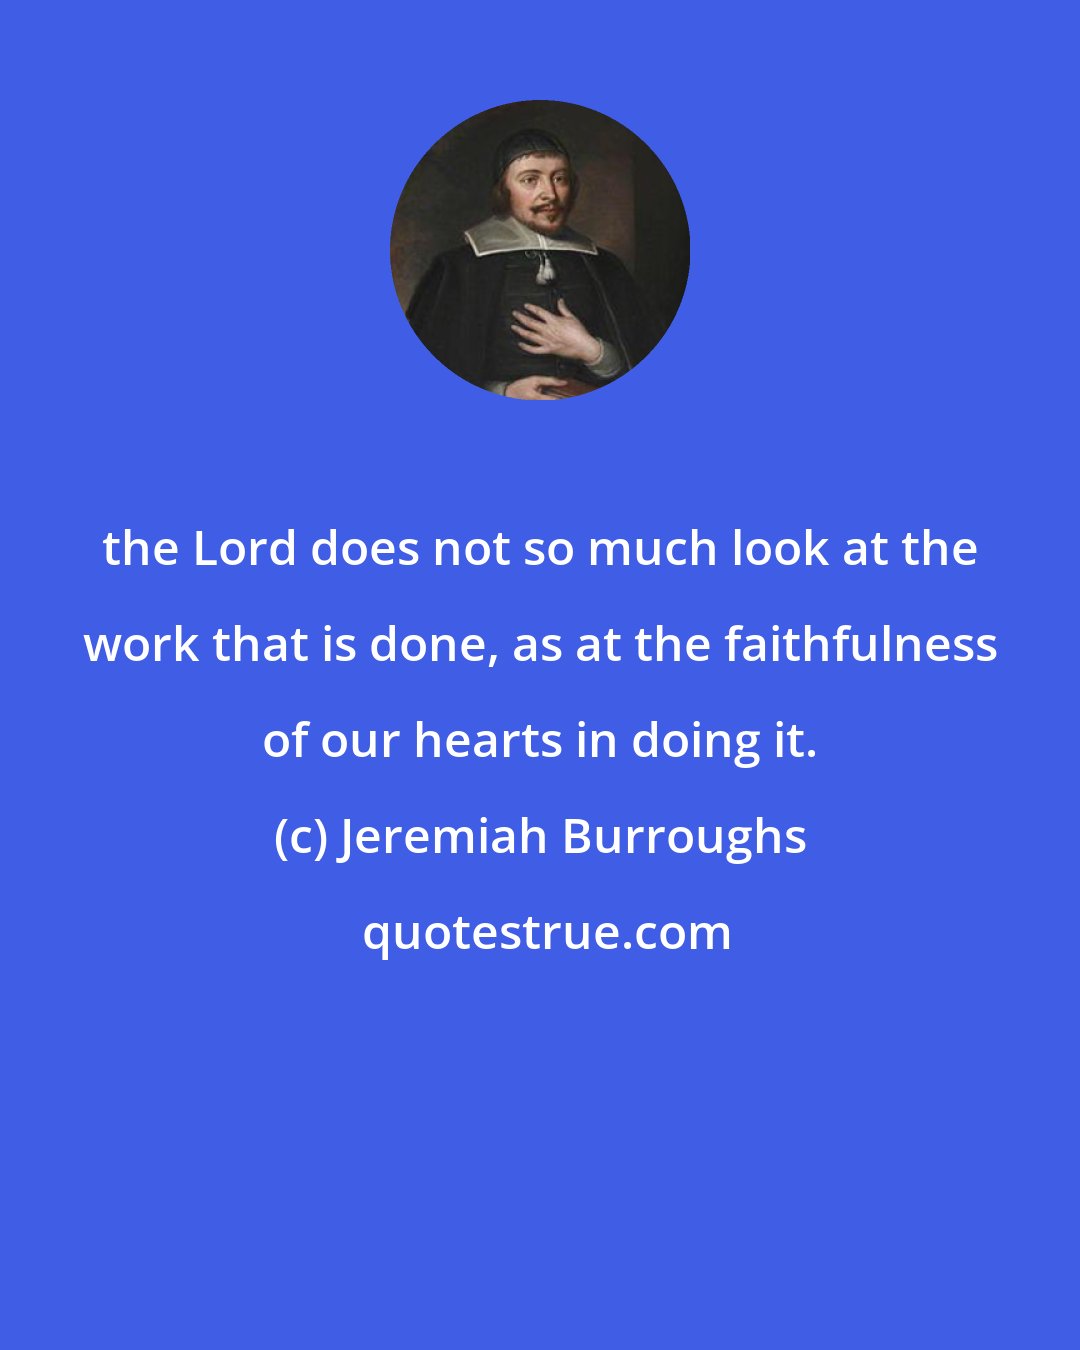 Jeremiah Burroughs: the Lord does not so much look at the work that is done, as at the faithfulness of our hearts in doing it.